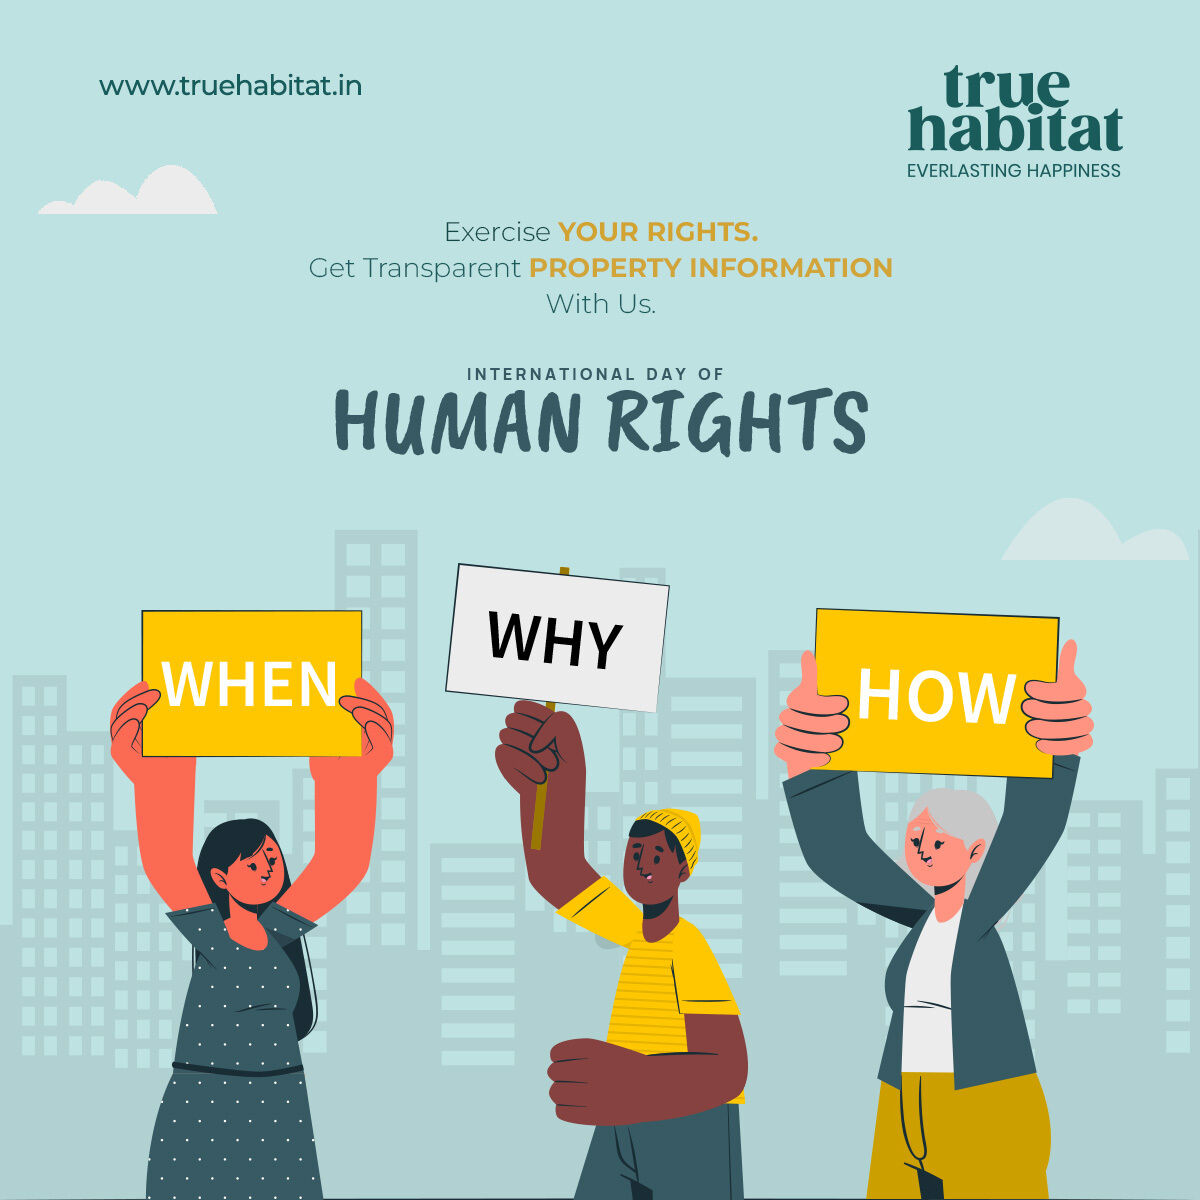 Practice all your right to live sustainable and Hi-tech present to empower the next generations. 

#truehabitat #humanrightsday2022 #HumanRightsDay #internationaldayofhumanrights #humanrights #freedom #commercialhub #modernretail #bodh79